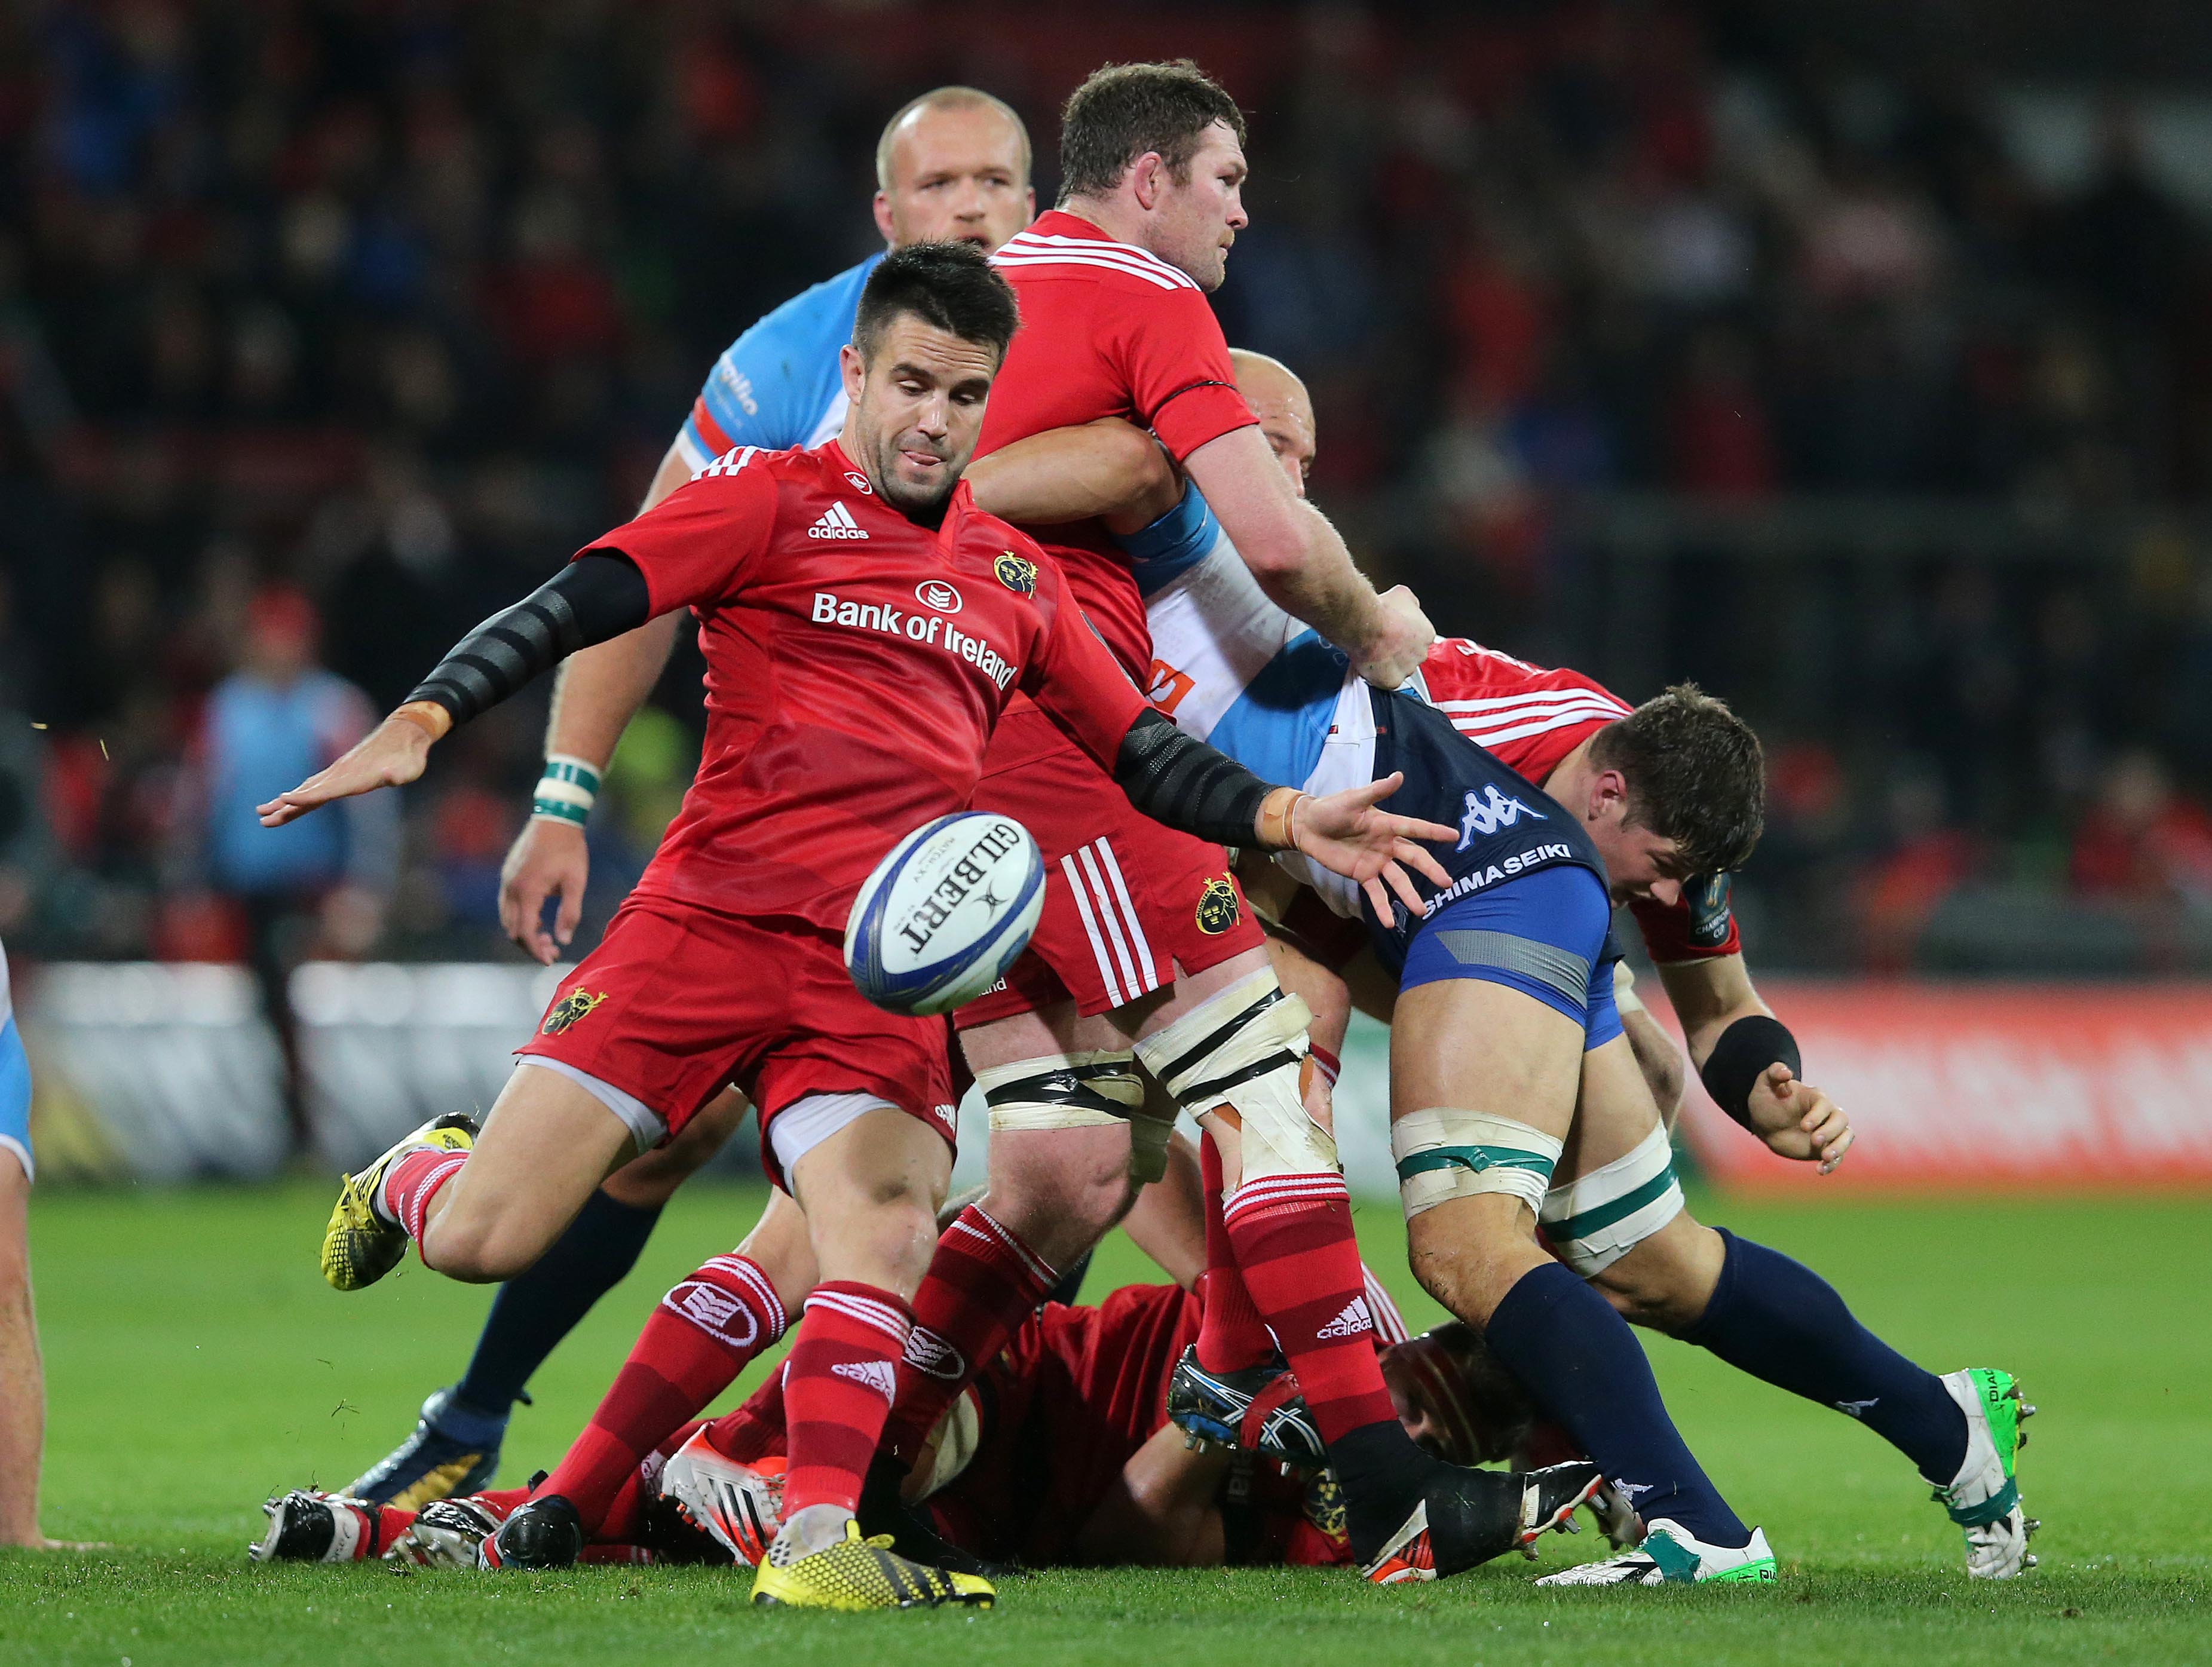 European Rugby Champions Cup Round 1, Thomond Park, Limerick 14/11/2015 Munster vs Benetton Treviso Munster's Conor Murray kicks clear   Mandatory Credit ©INPHO/Ryan Byrne